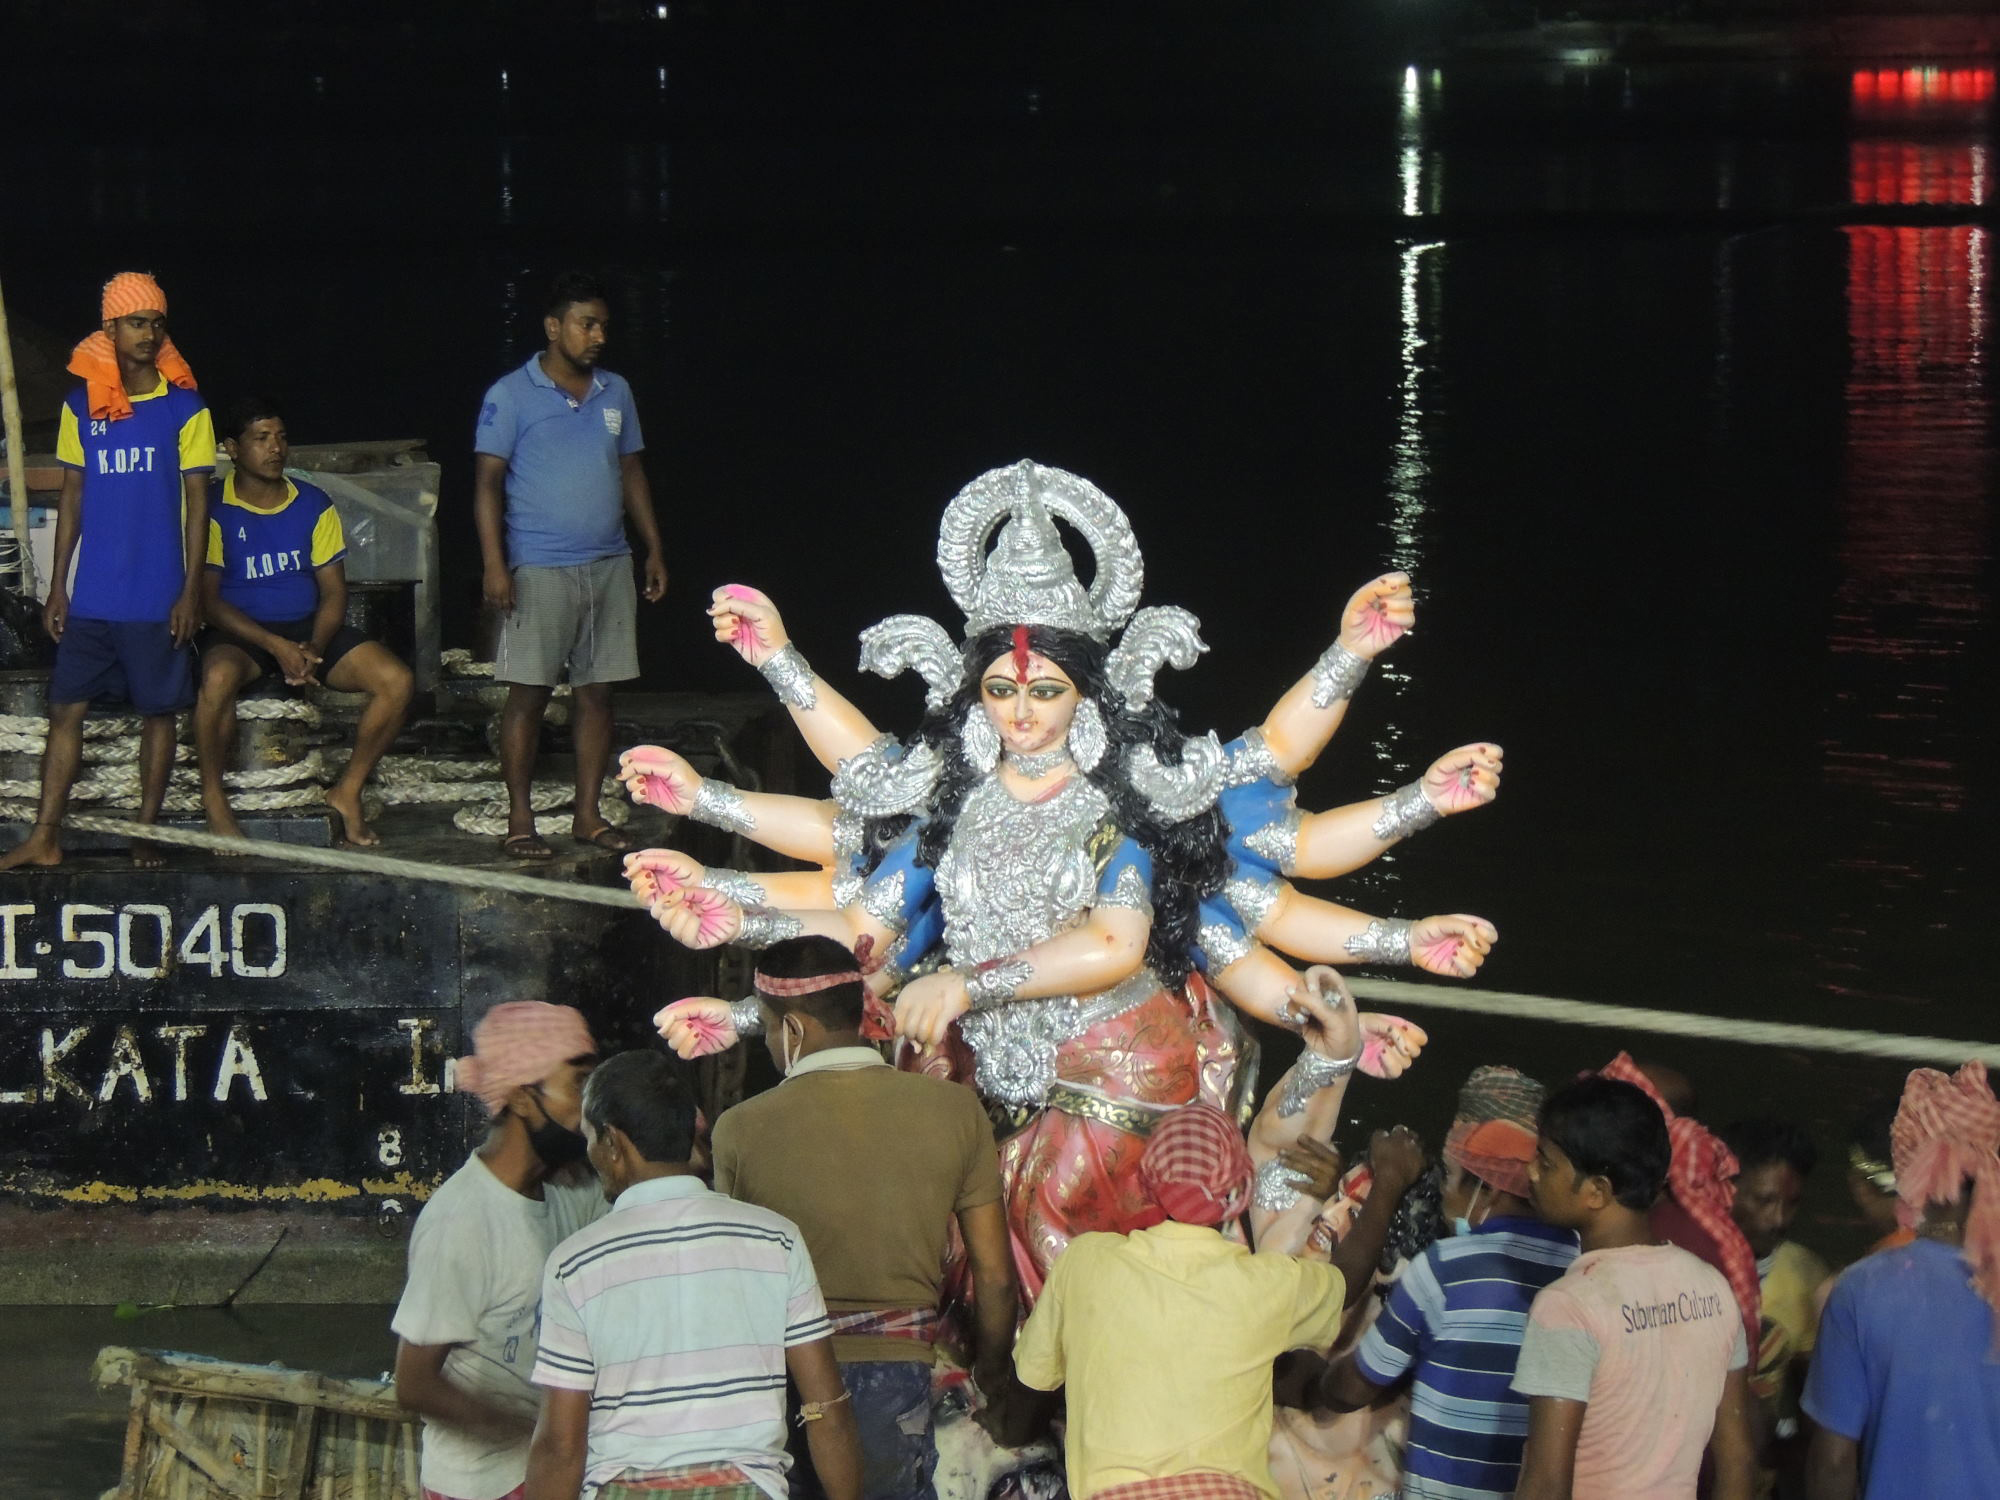 idol immersion scene on the bank of the Hooghly in Kolkata [Image by: Jayanta Basu]